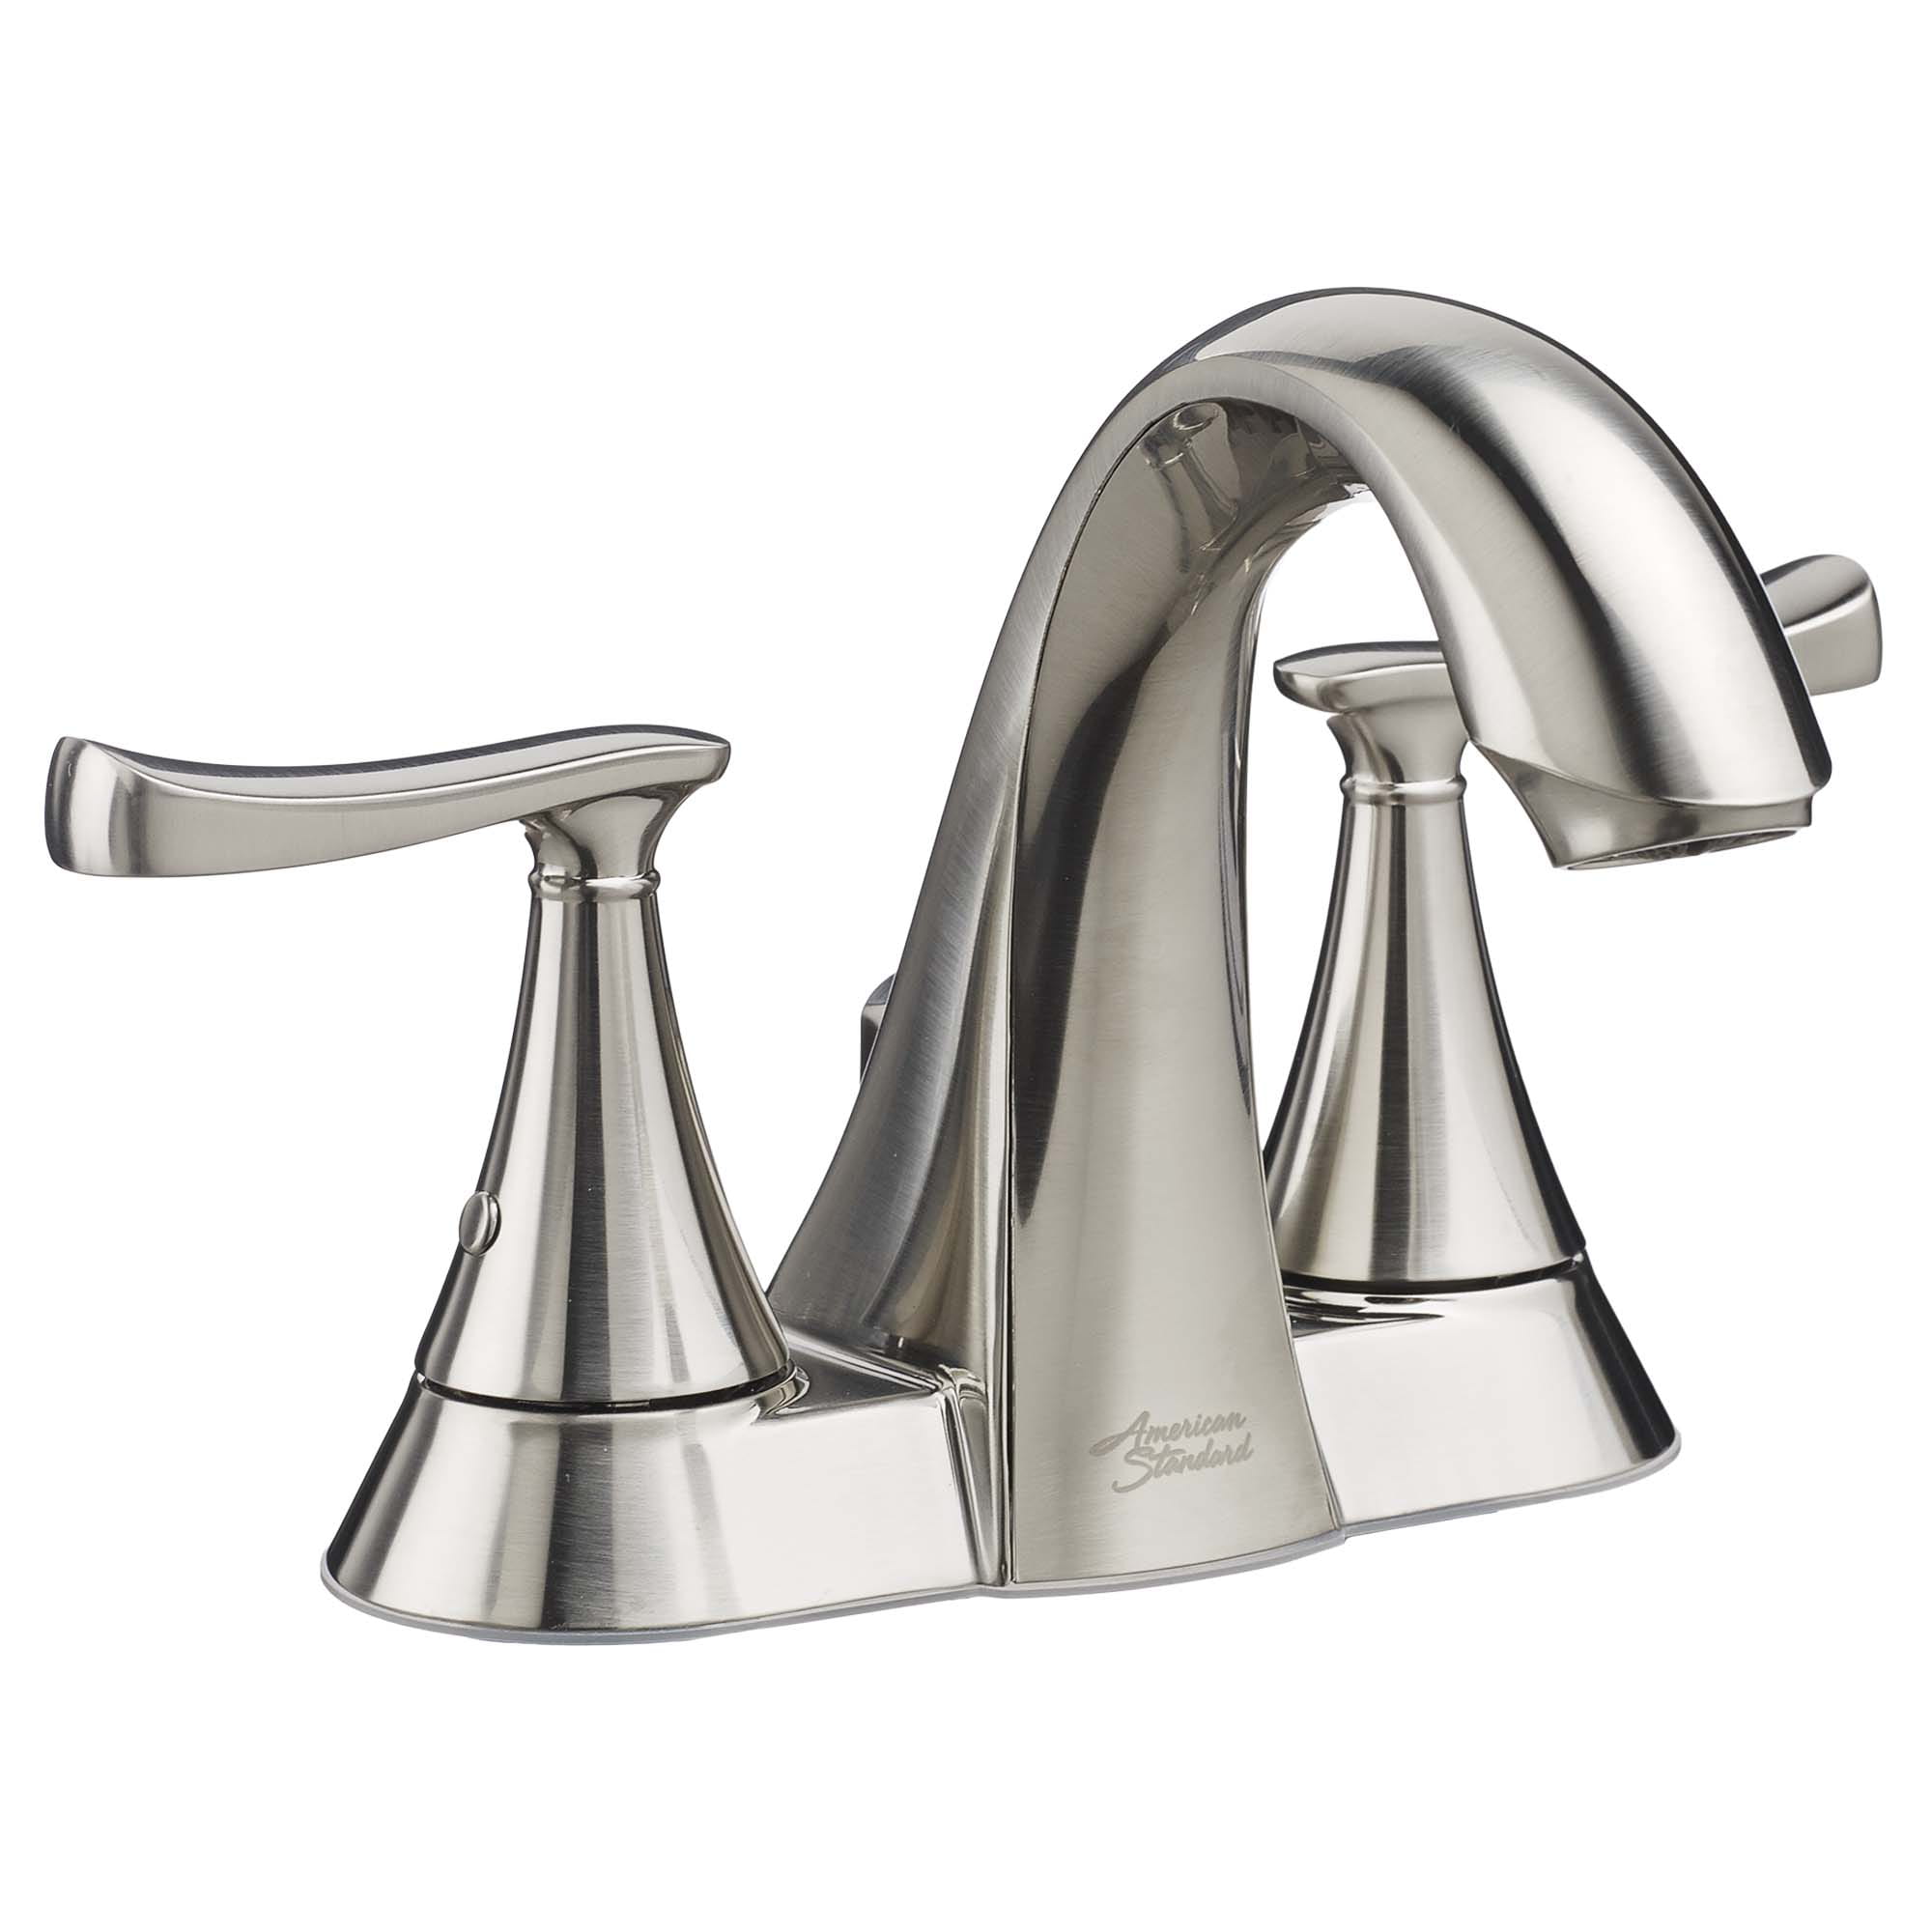 Chatfield® 4-Inch Centerset 2-Handle Bathroom Faucet 1.2 gpm/4.5 L/min With Lever Handles